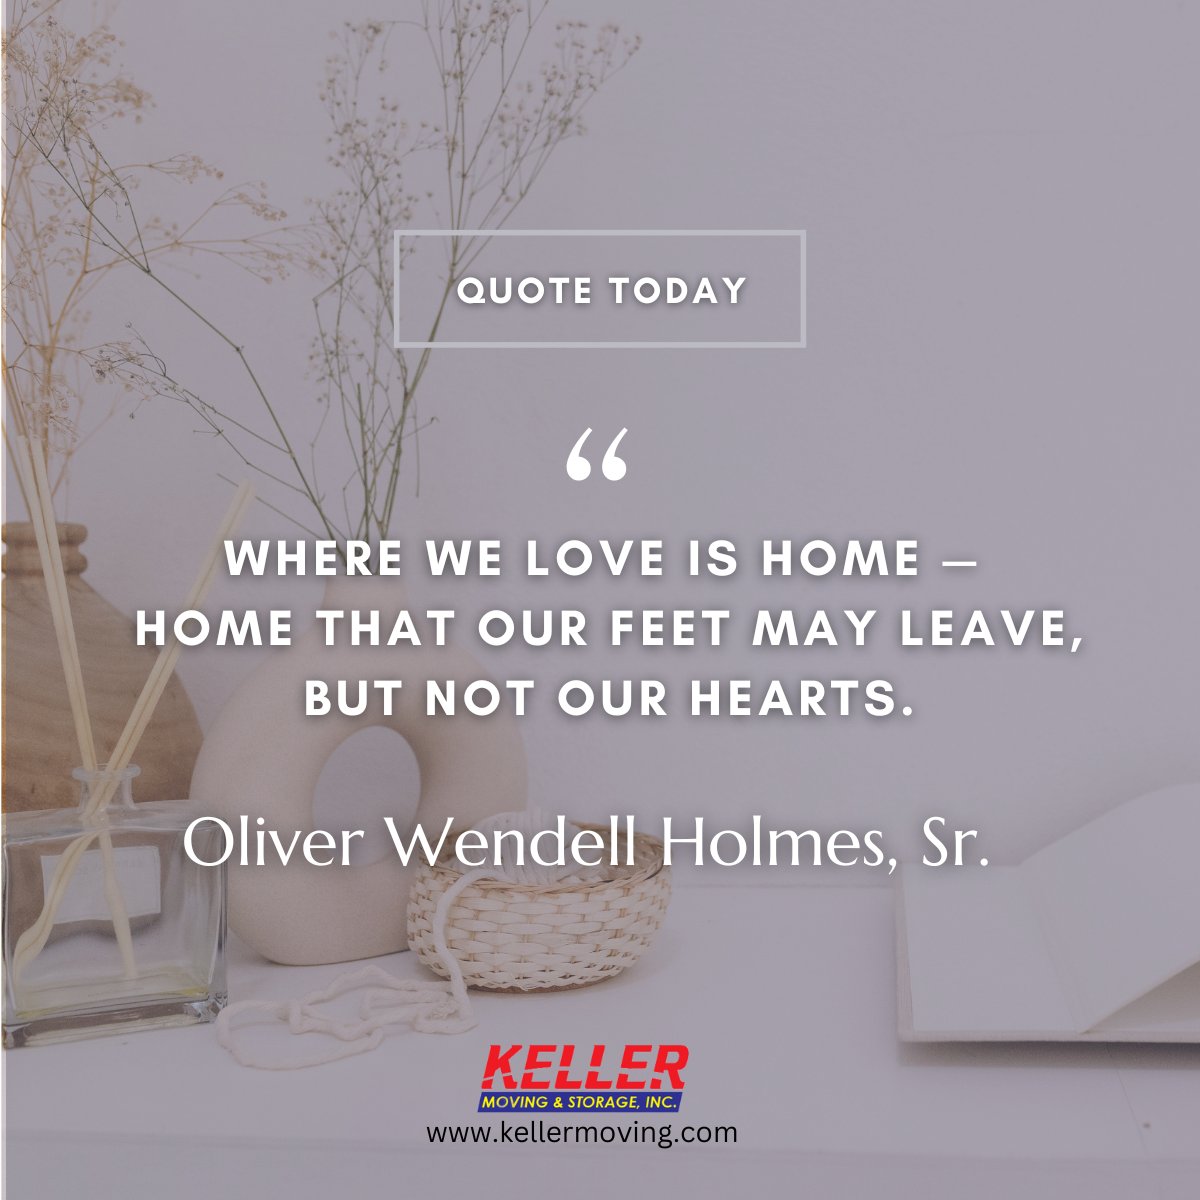 A more sophisticated way of saying 'Home is where the heart is.' ❤️

#homesweethome #home #inspirationalquote #qotd #quoteoftheday #dailyquotes #quotes #goinghome #homequotes